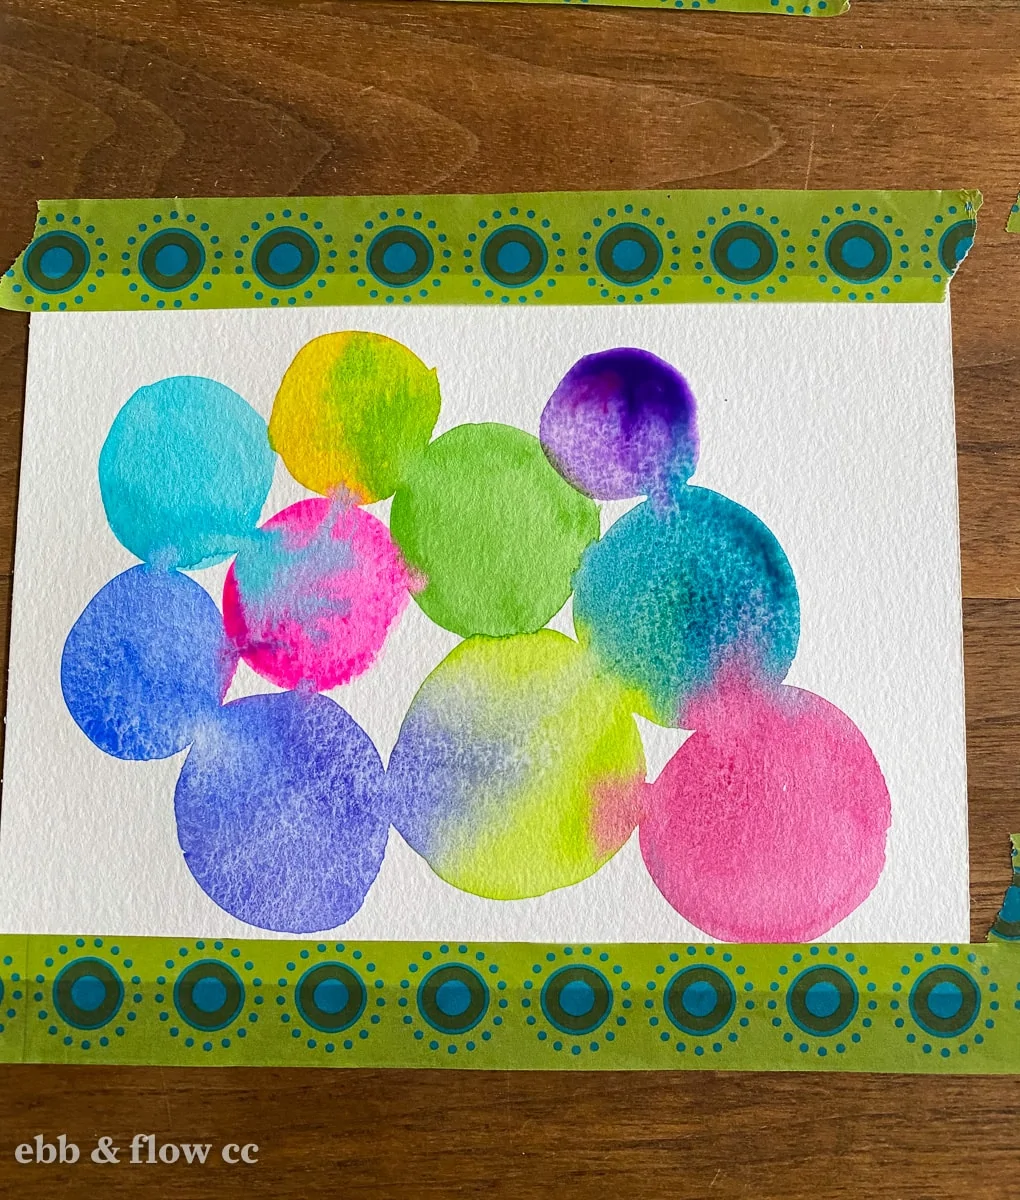 watercolor circles painted in bright colors